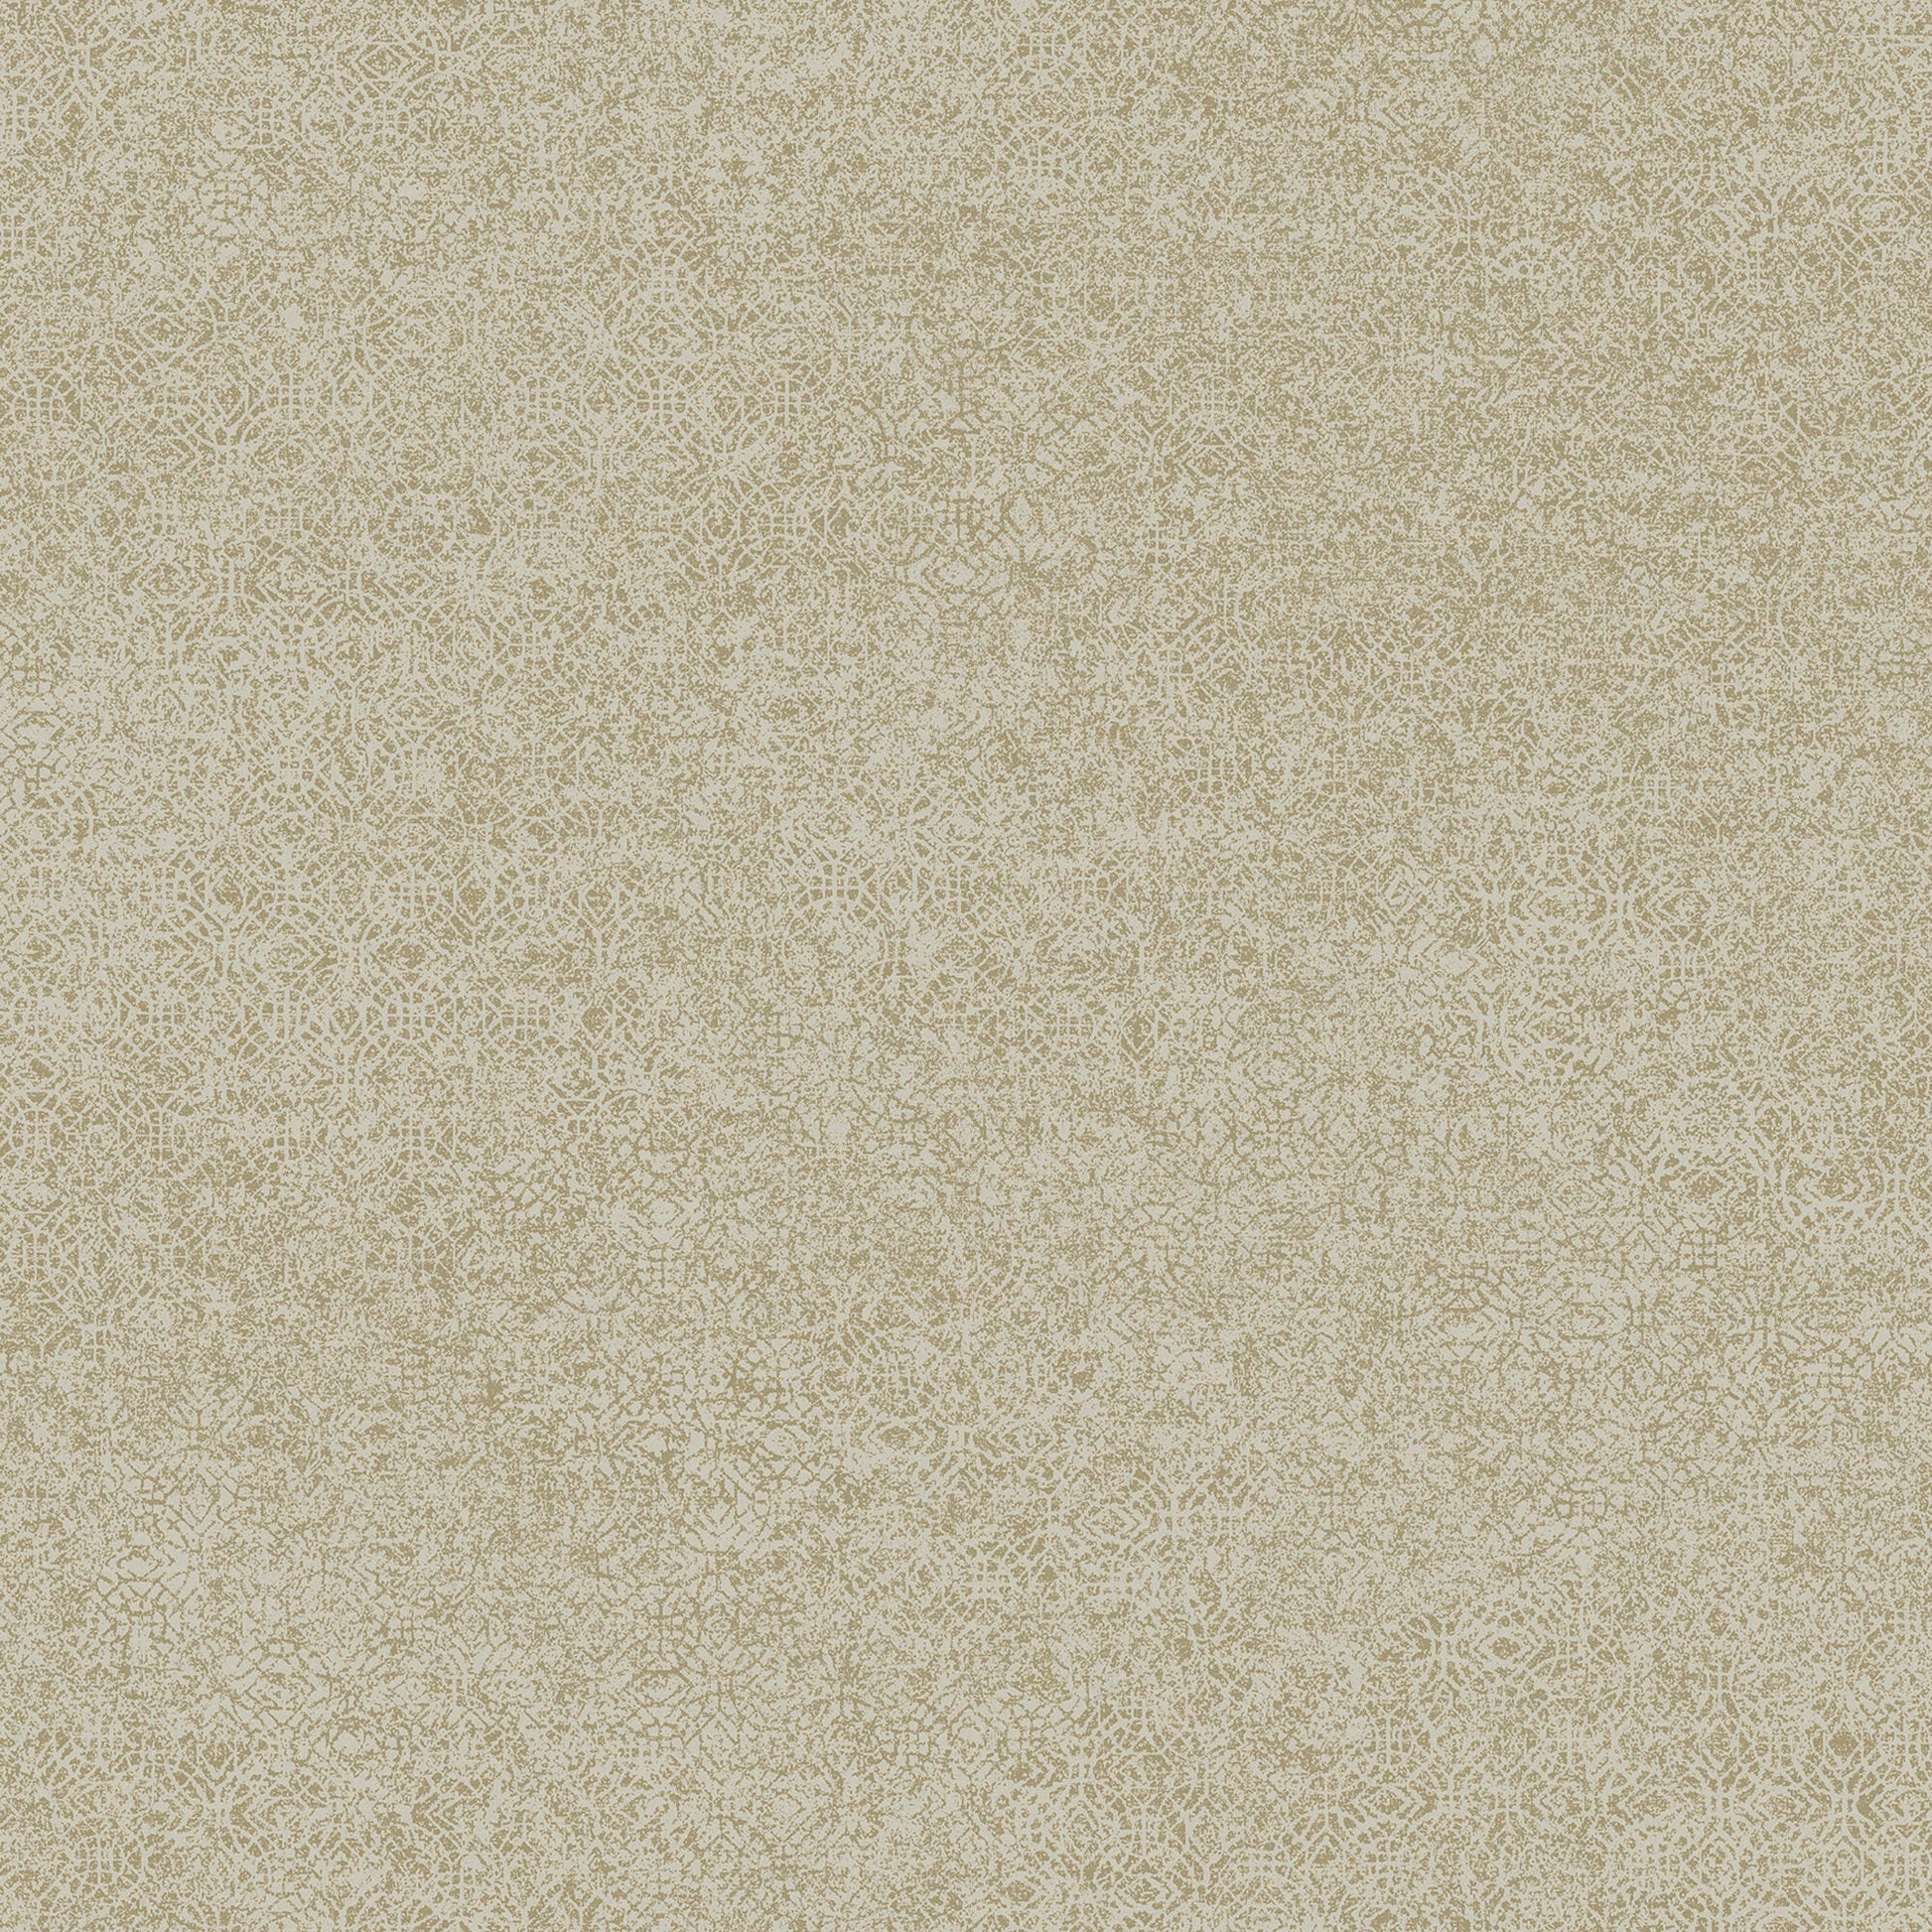 Purchase JF Wallpaper Product 8207 16W9321 Gold Texture Wallpaper